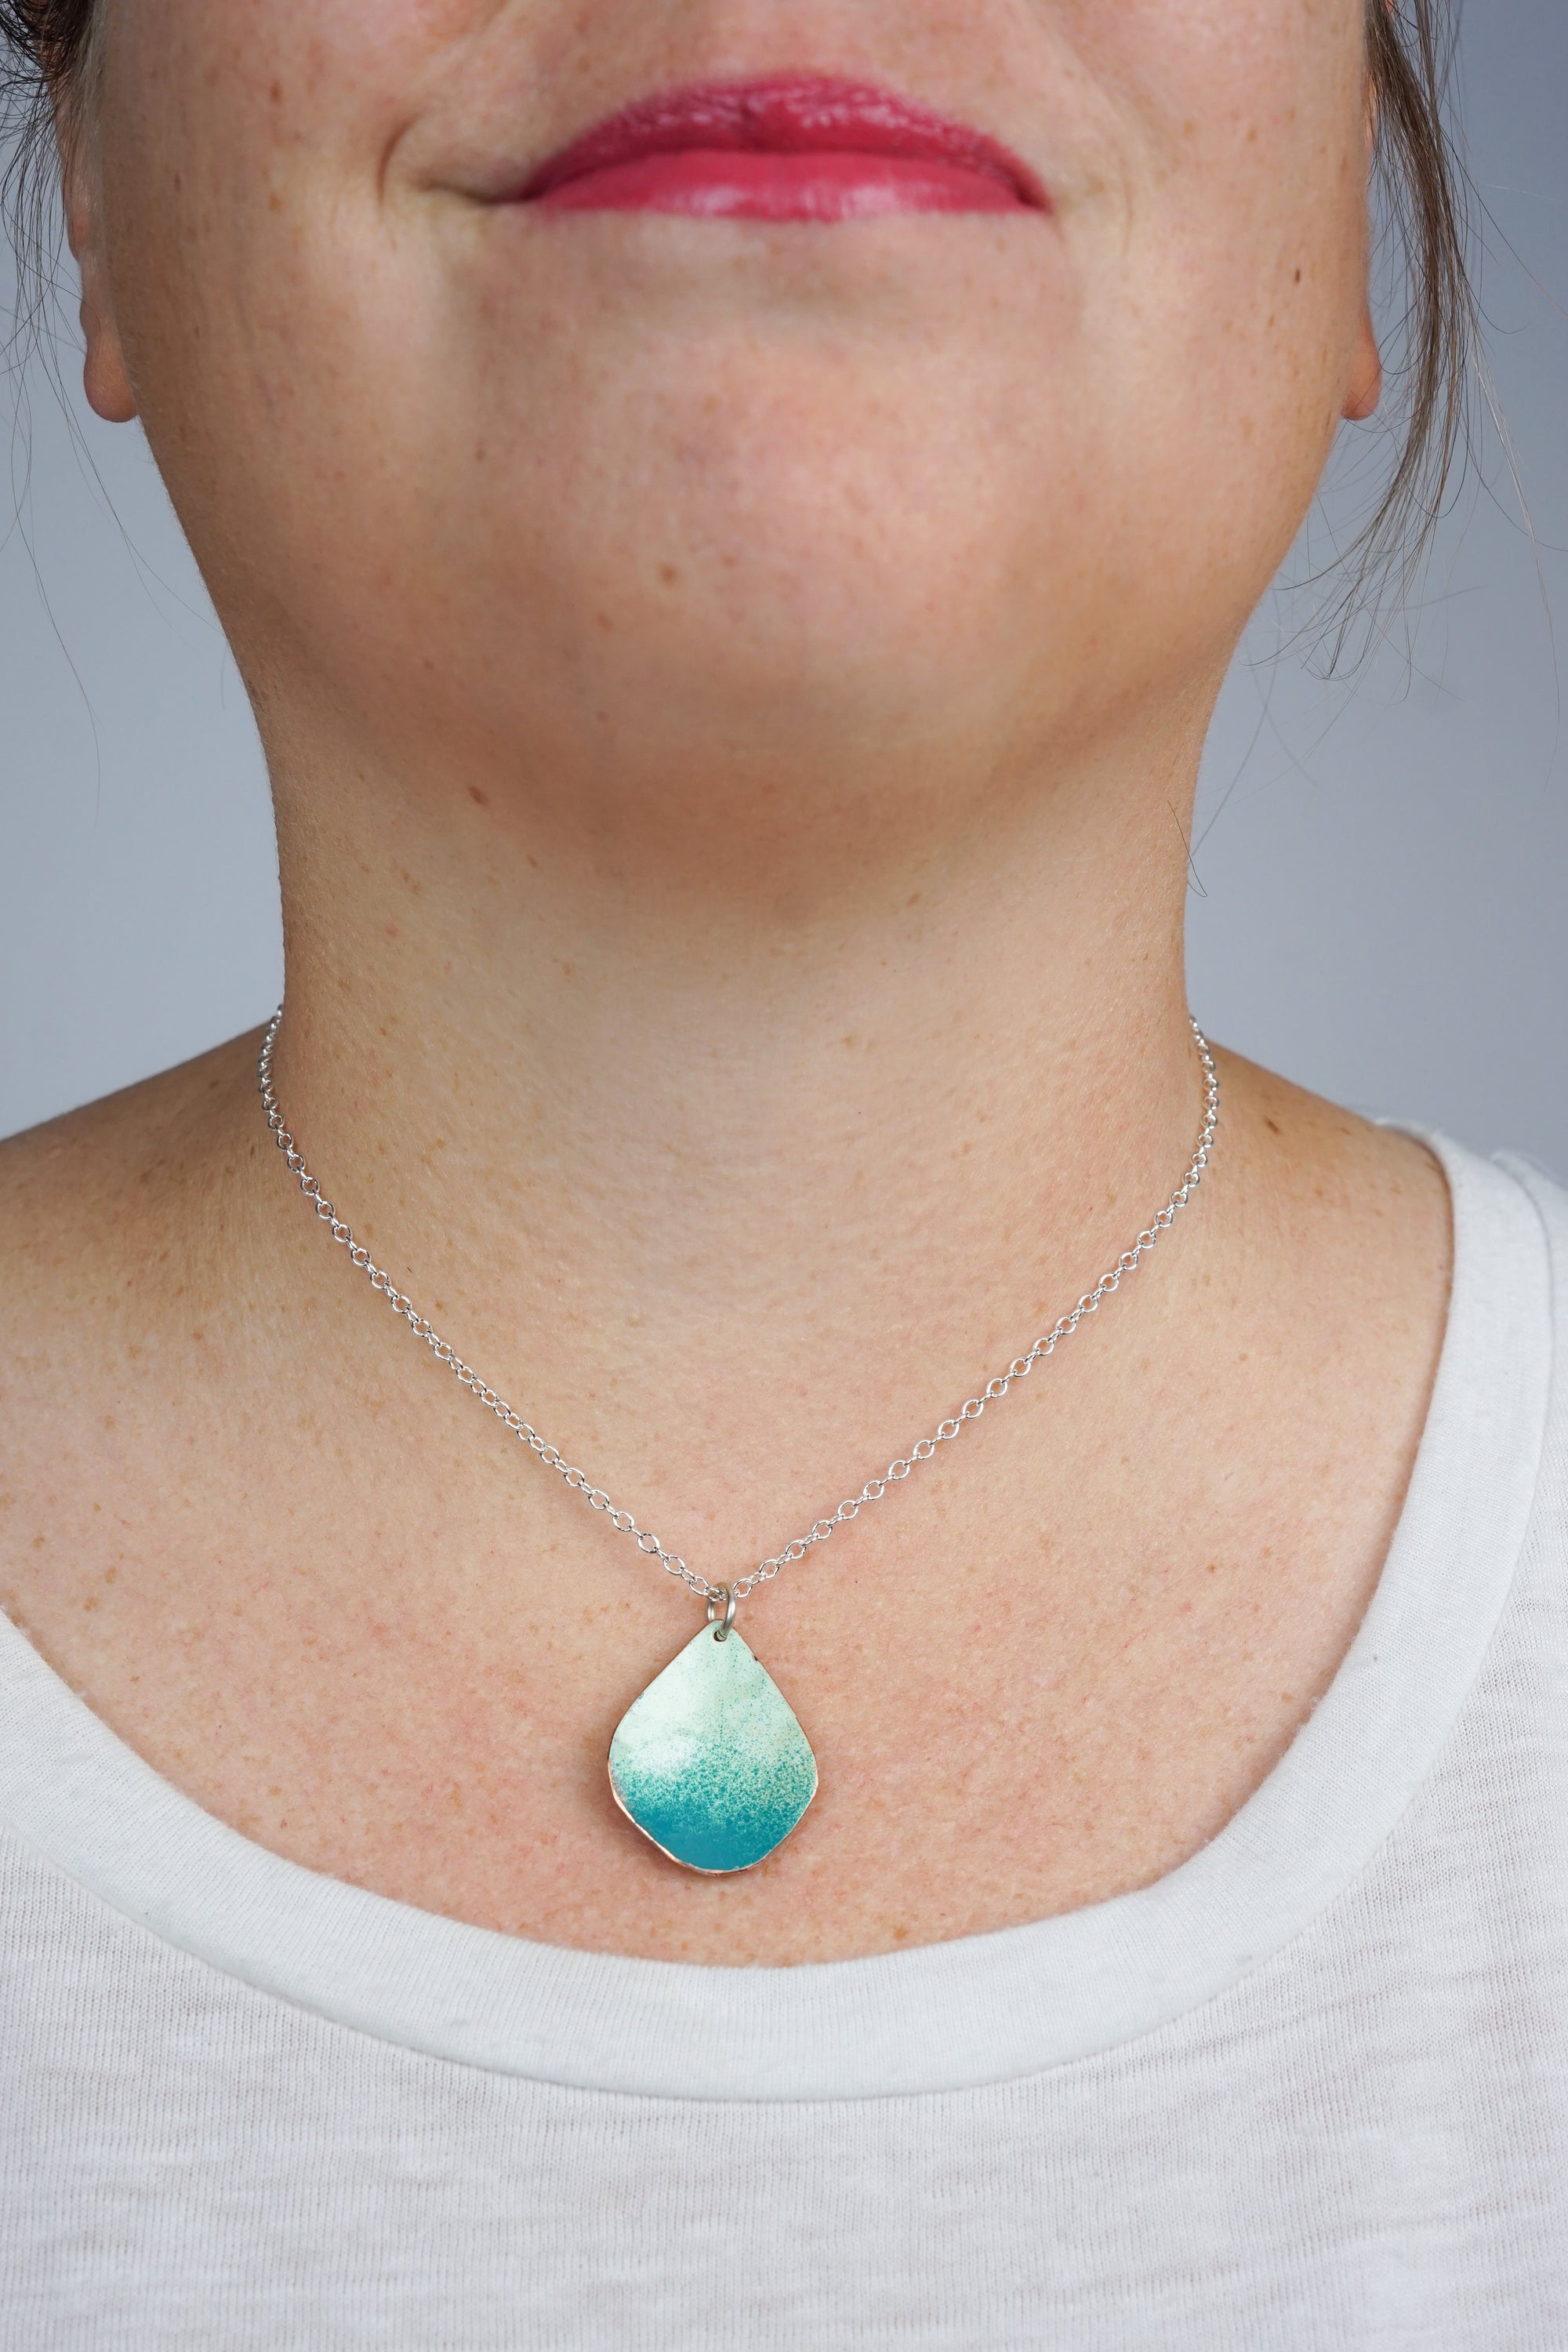 Chroma Pendant in Soft Mint and Bold Teal